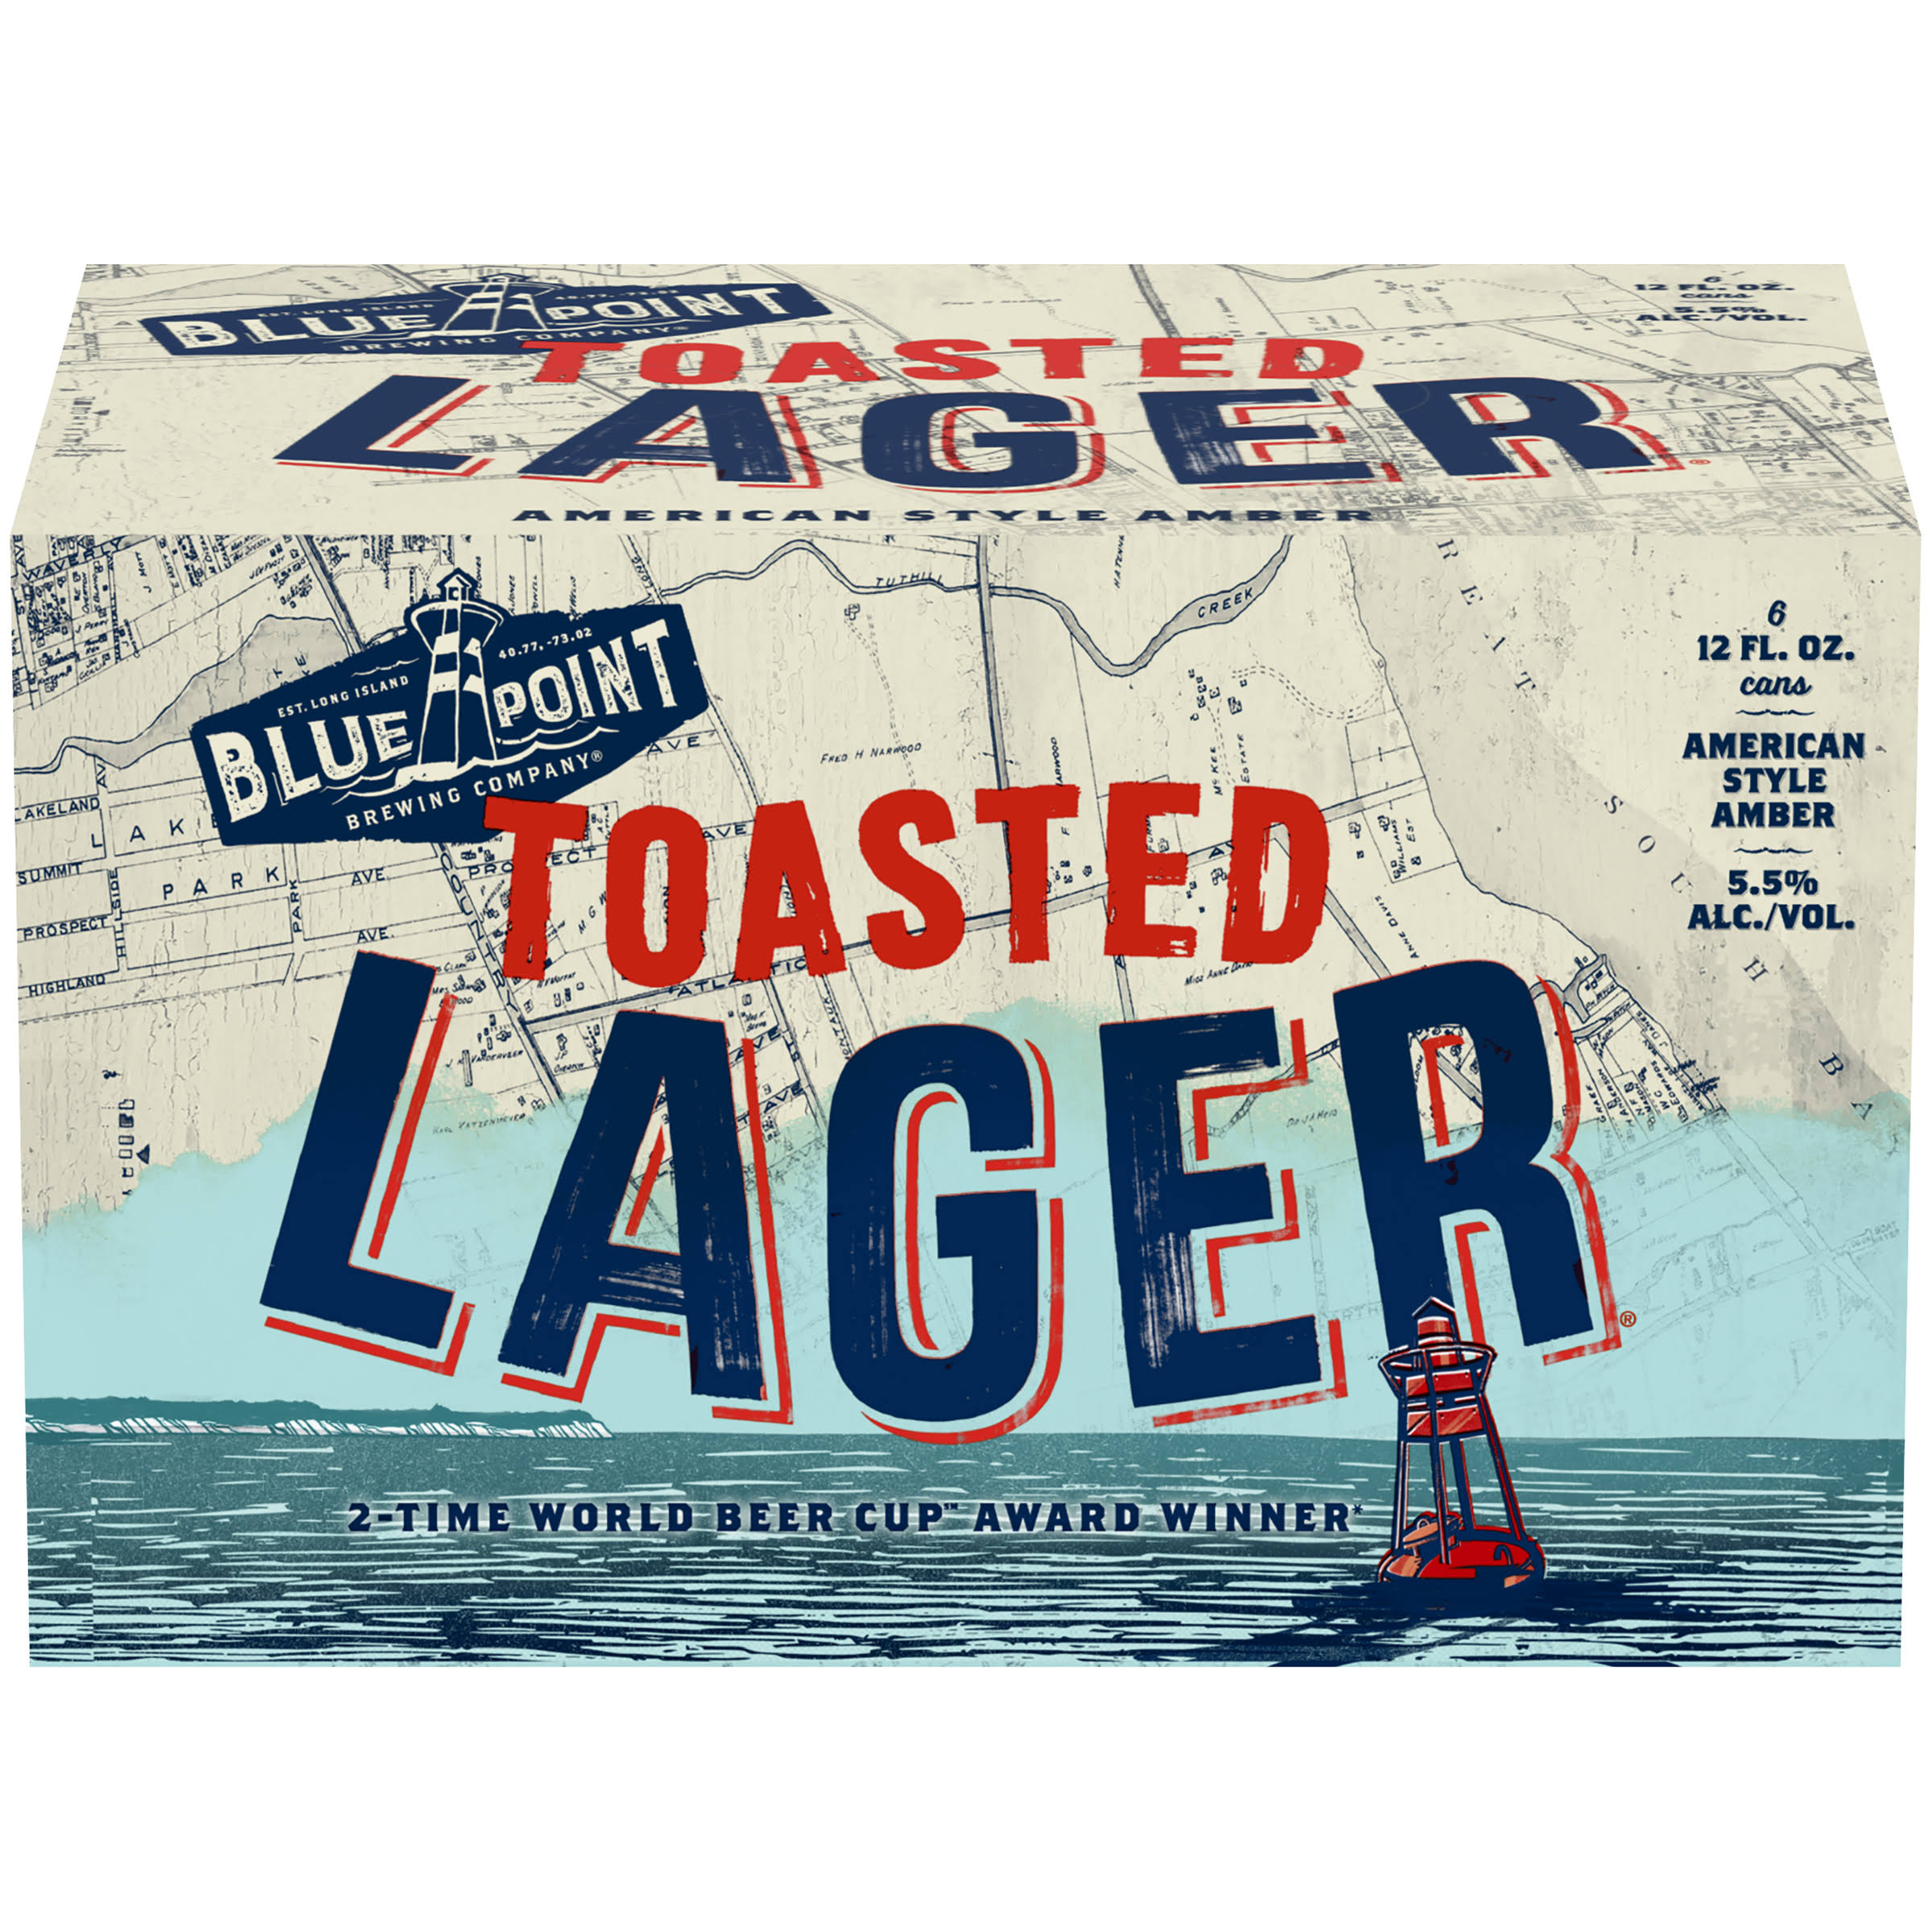 Blue Point Beer, Toasted Lager - 6 pack, 12 fl oz cans